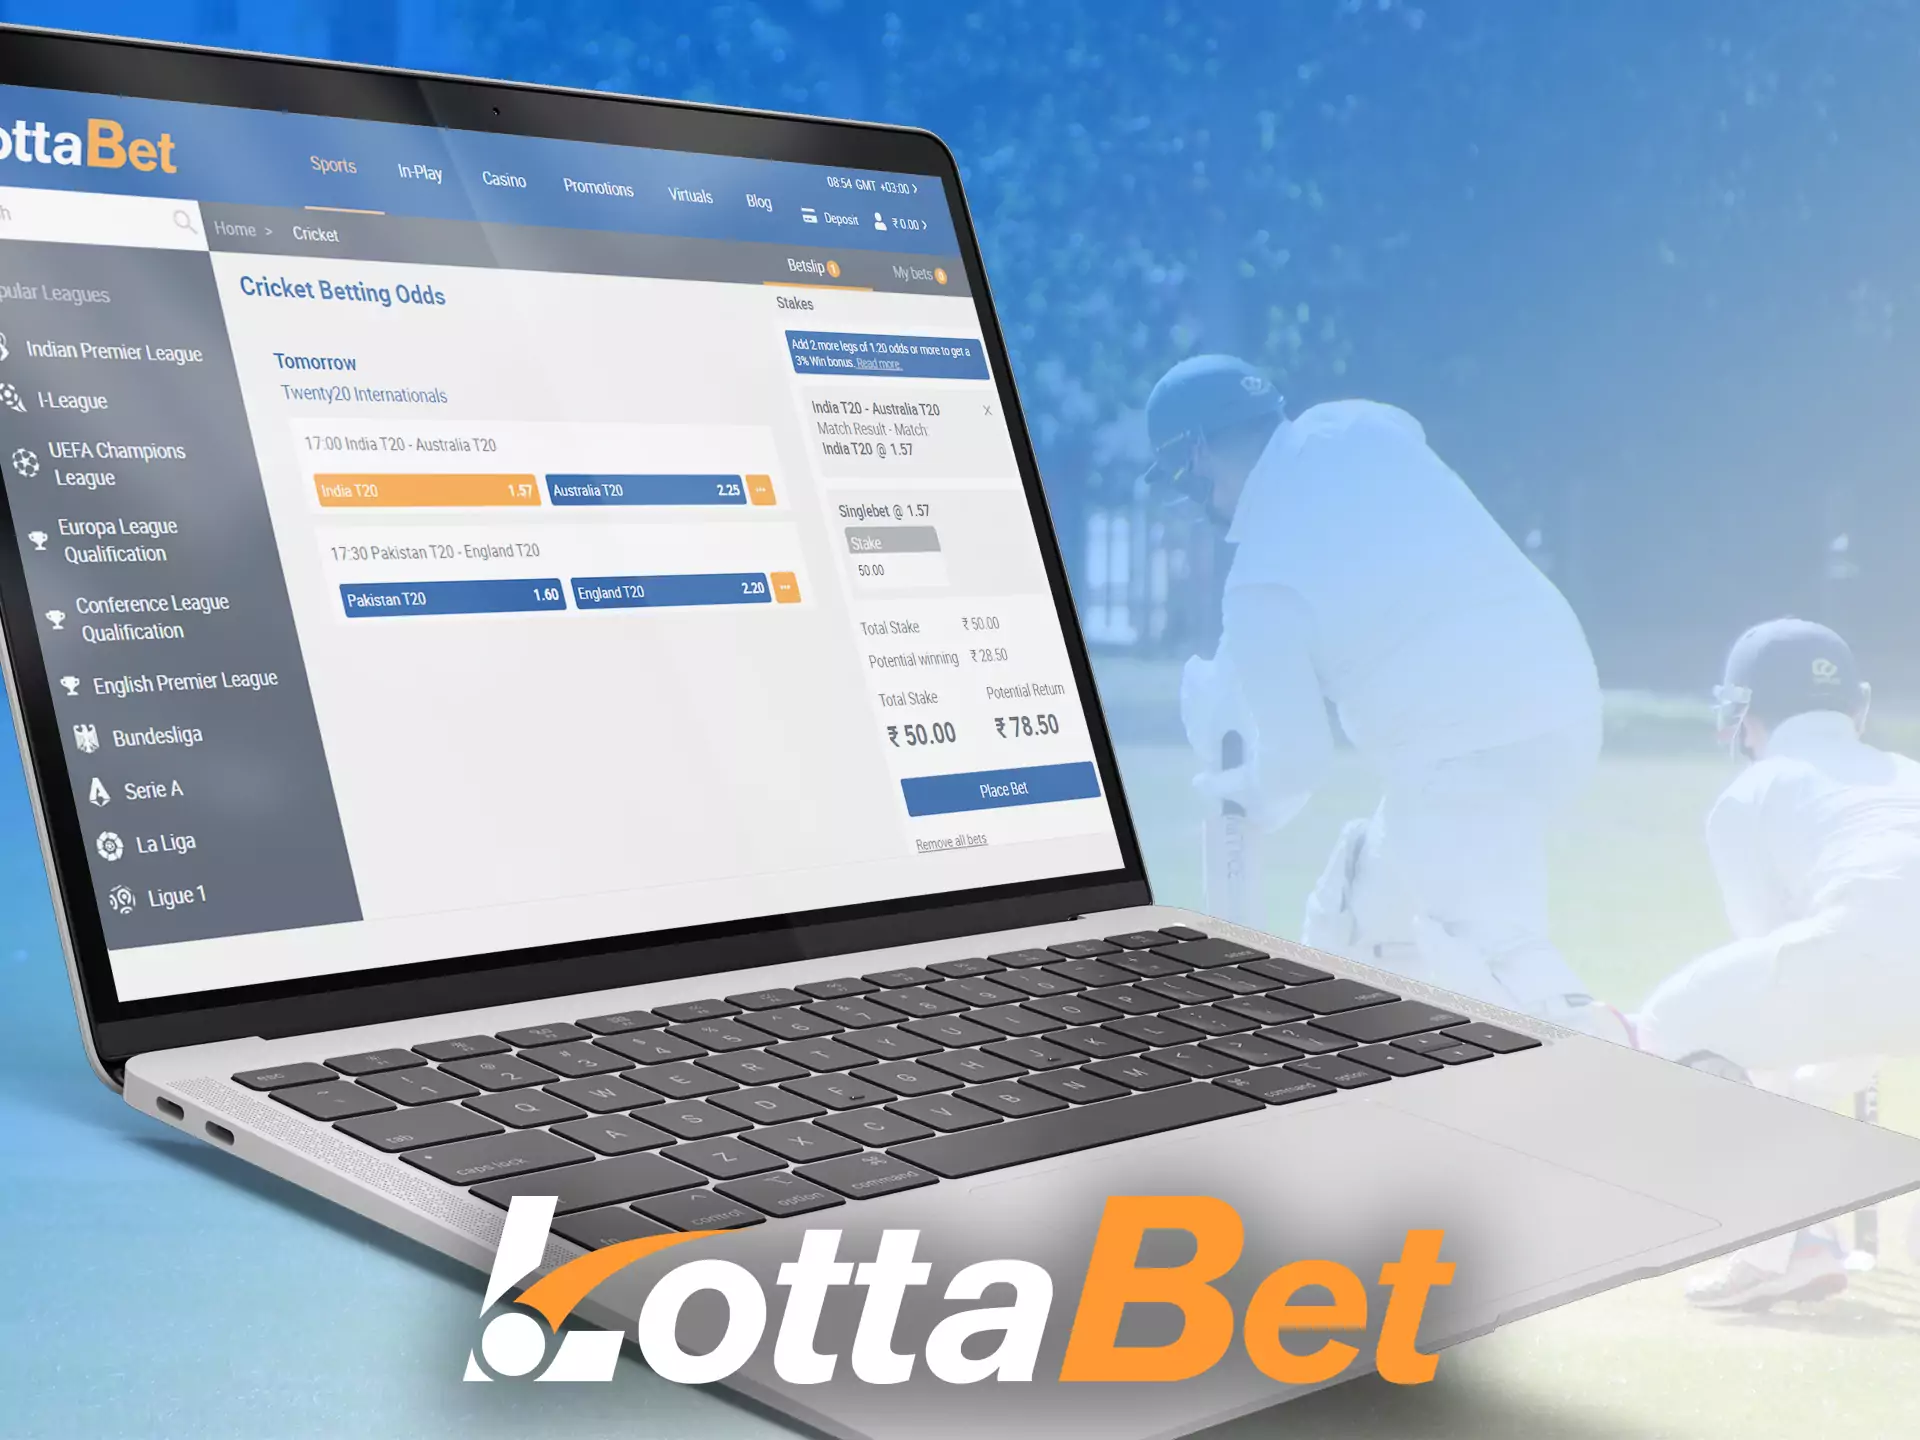 On PC, you can enjoy the Lottabet sportsbook and casino in a browser.